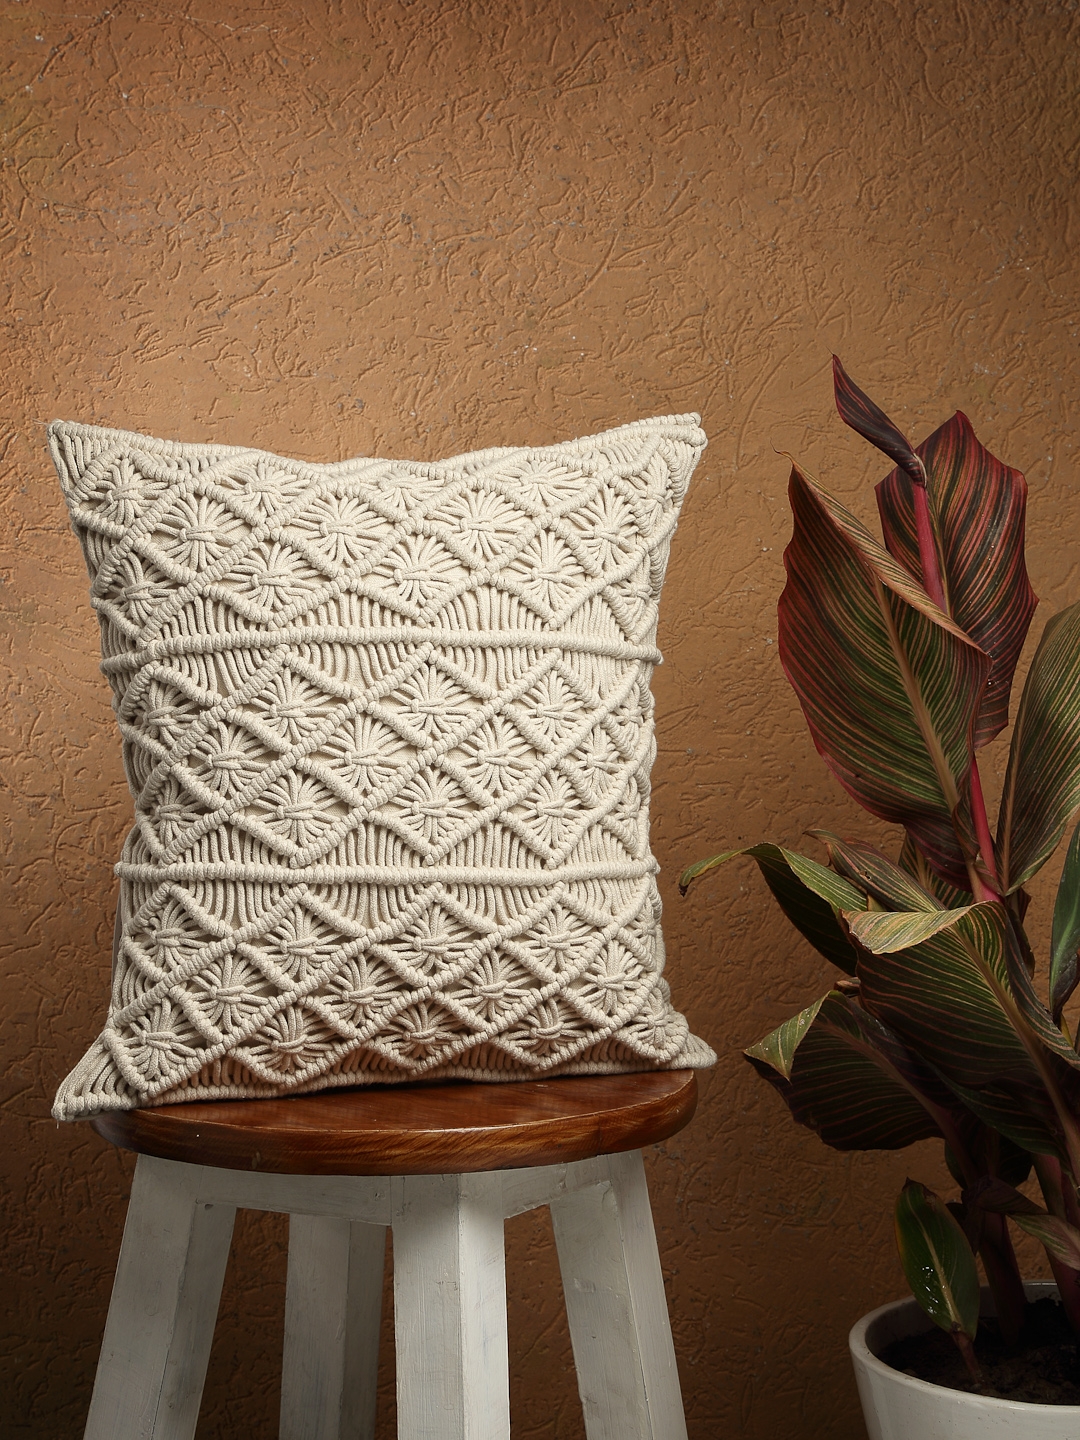 ANWYN Triangular Knotted Pattern Hand-made Macrame Cushion Cover II 100% Cotton II SIZE: 16"X16" II Suitable for Living Room, Office, Dining, Garden & Balcony